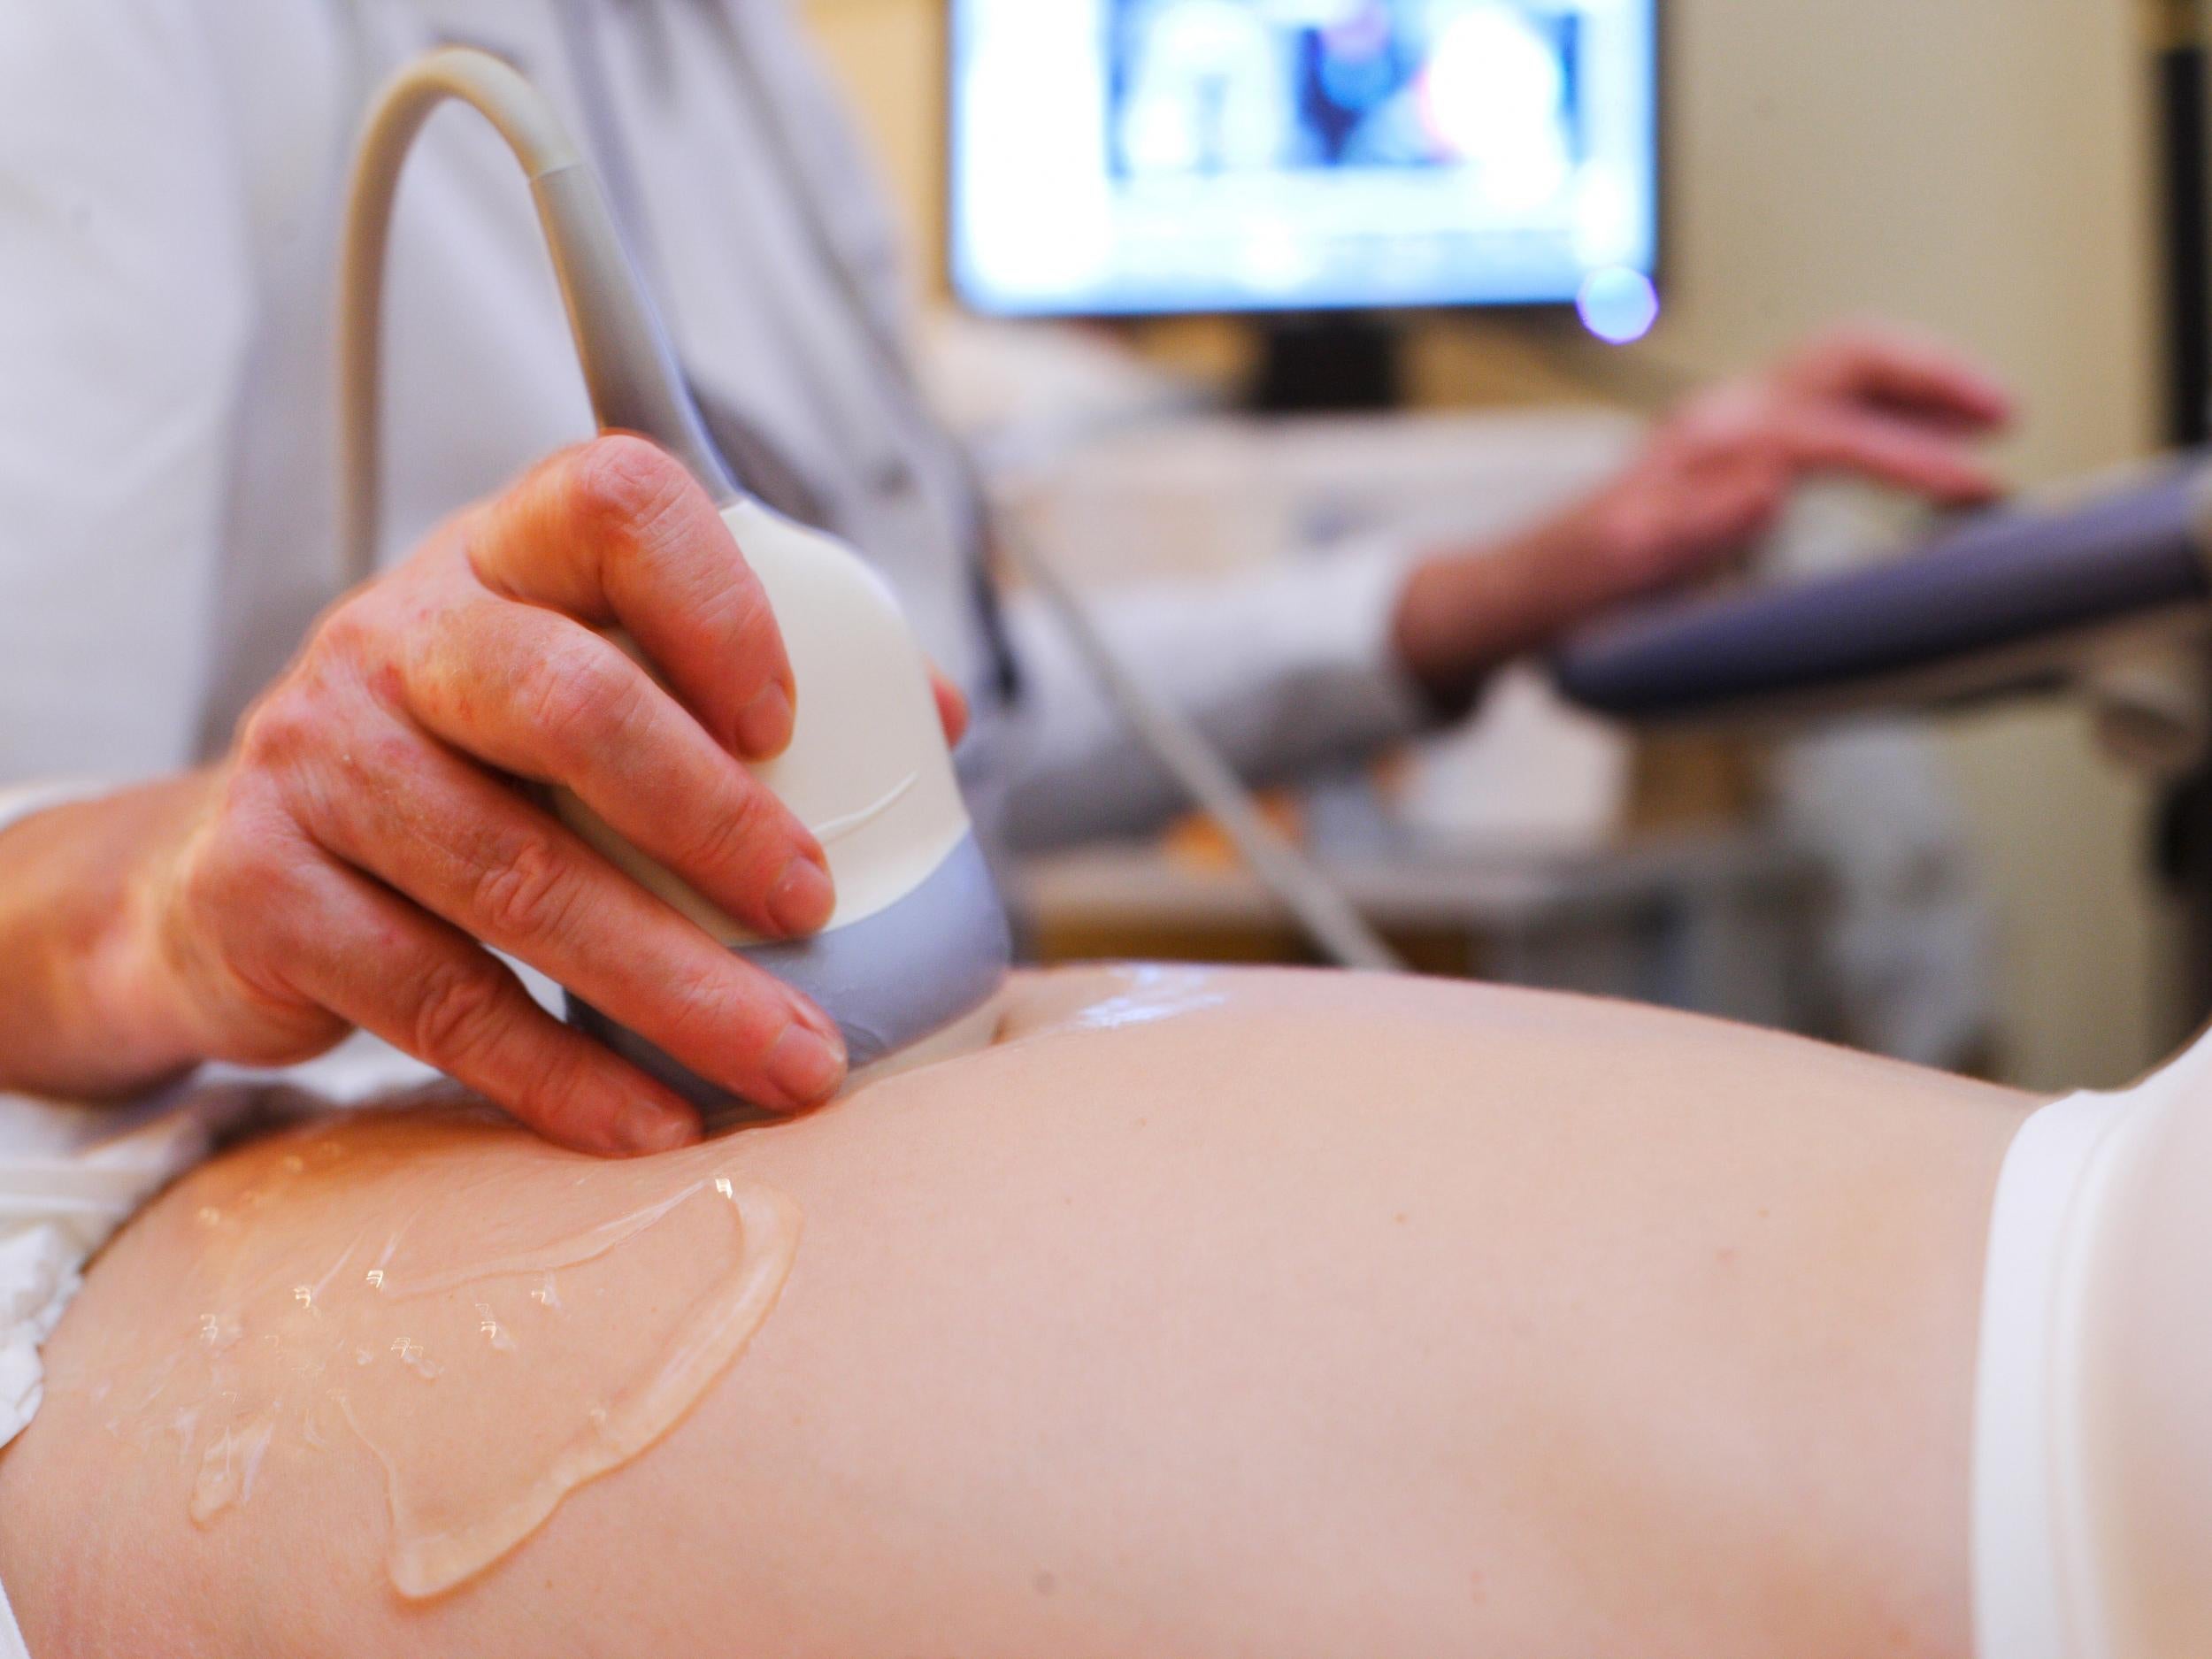 Ultrasound checks are an important part of antenatal care